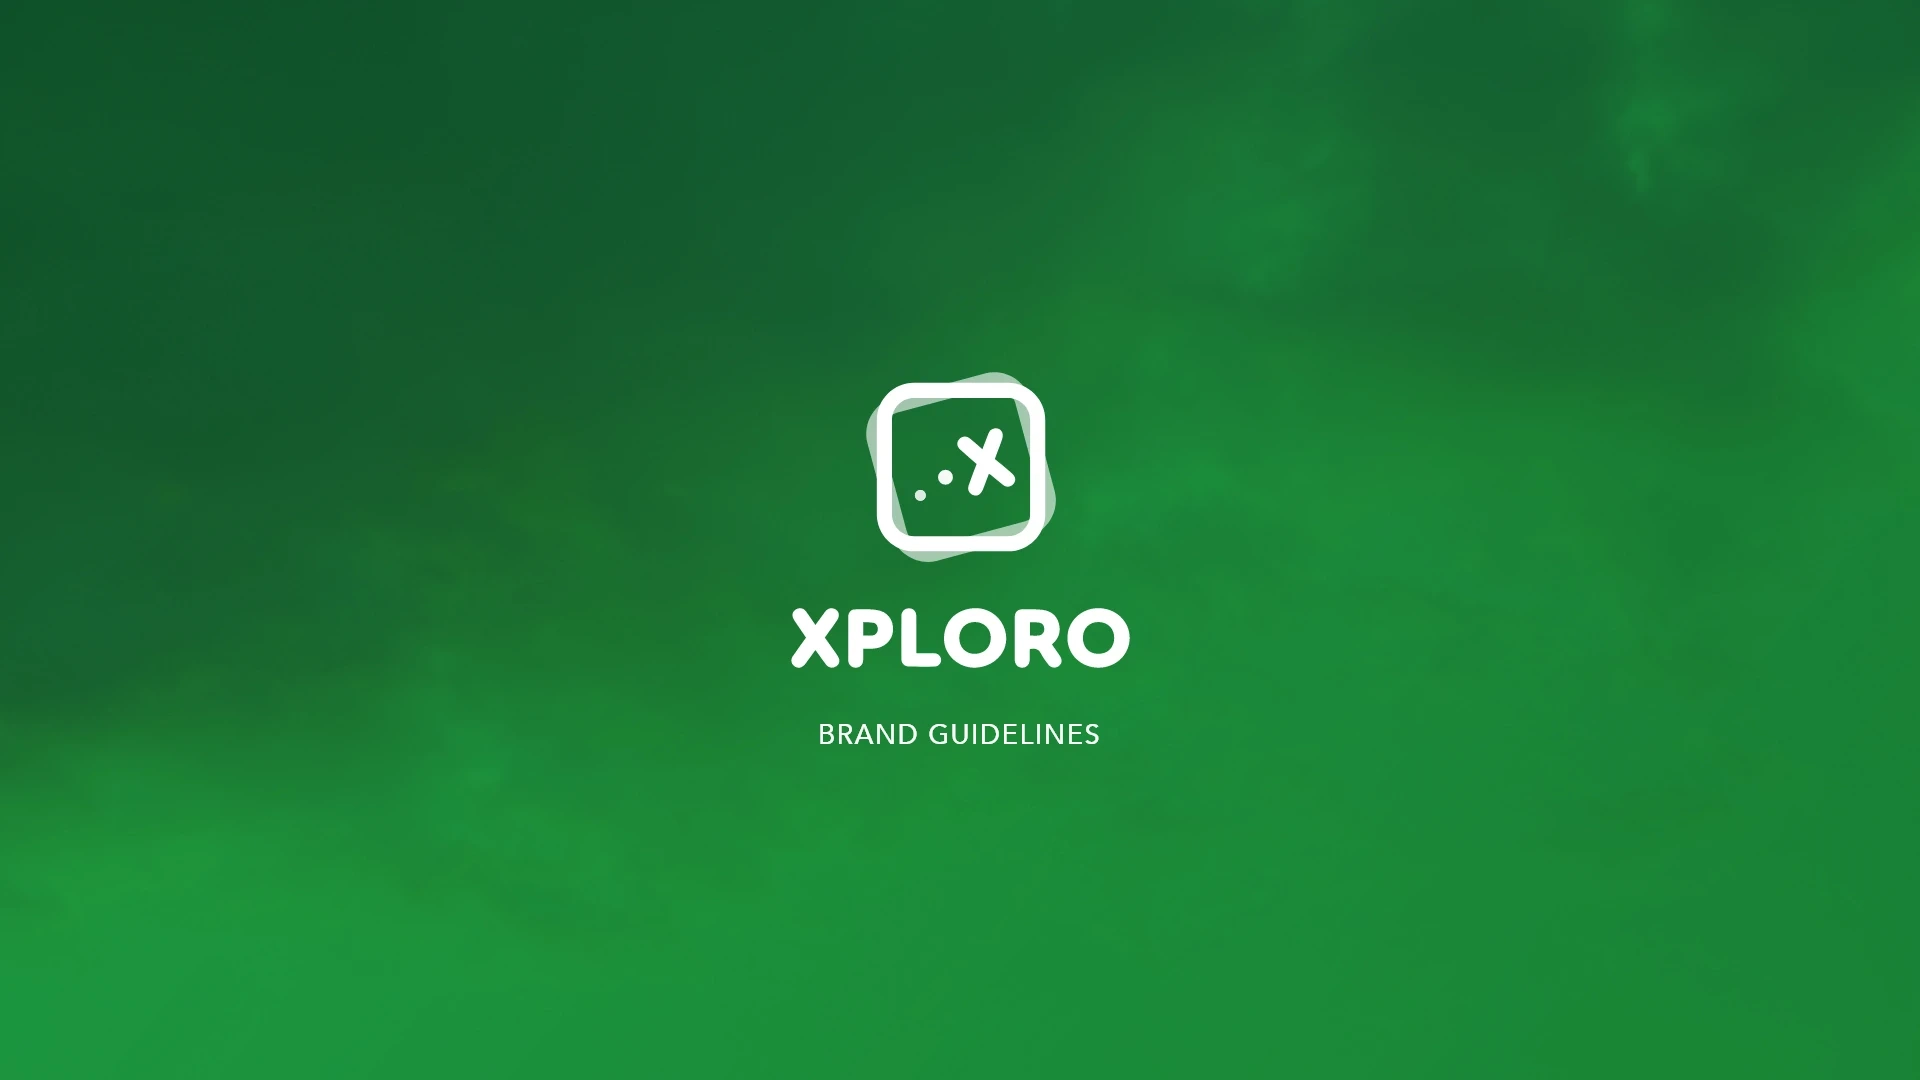 The first page of the Xploro brand guidelines shows the logo in white on a green background with dark clouds in the left-hand corner